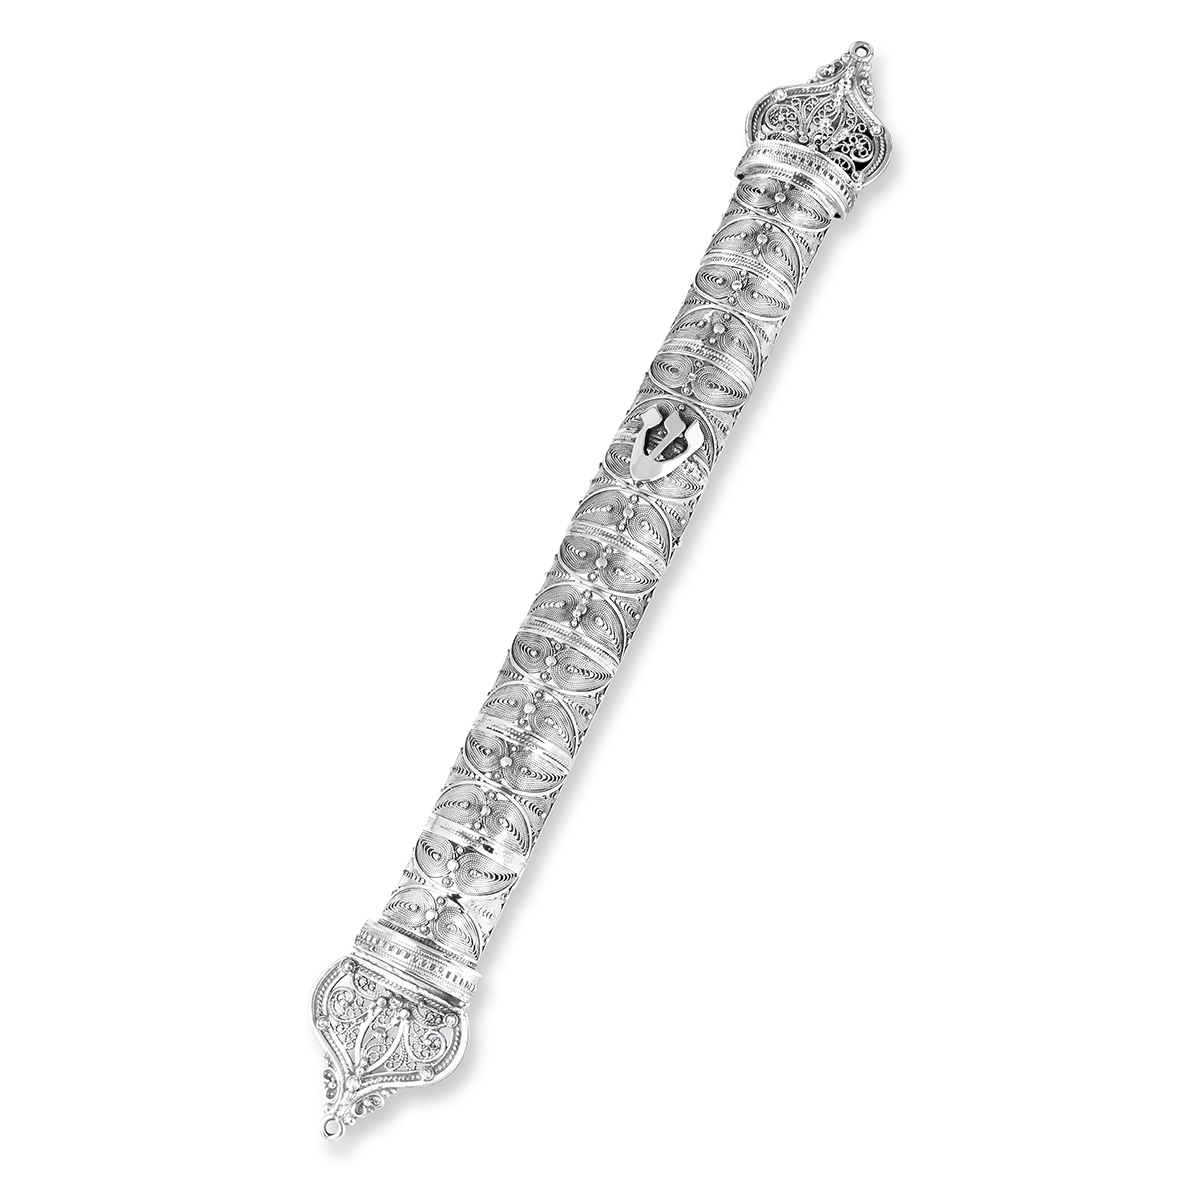 Traditional Yemenite Art Extra Large Handcrafted Sterling Silver Mezuzah Case With Ornate Design - 1